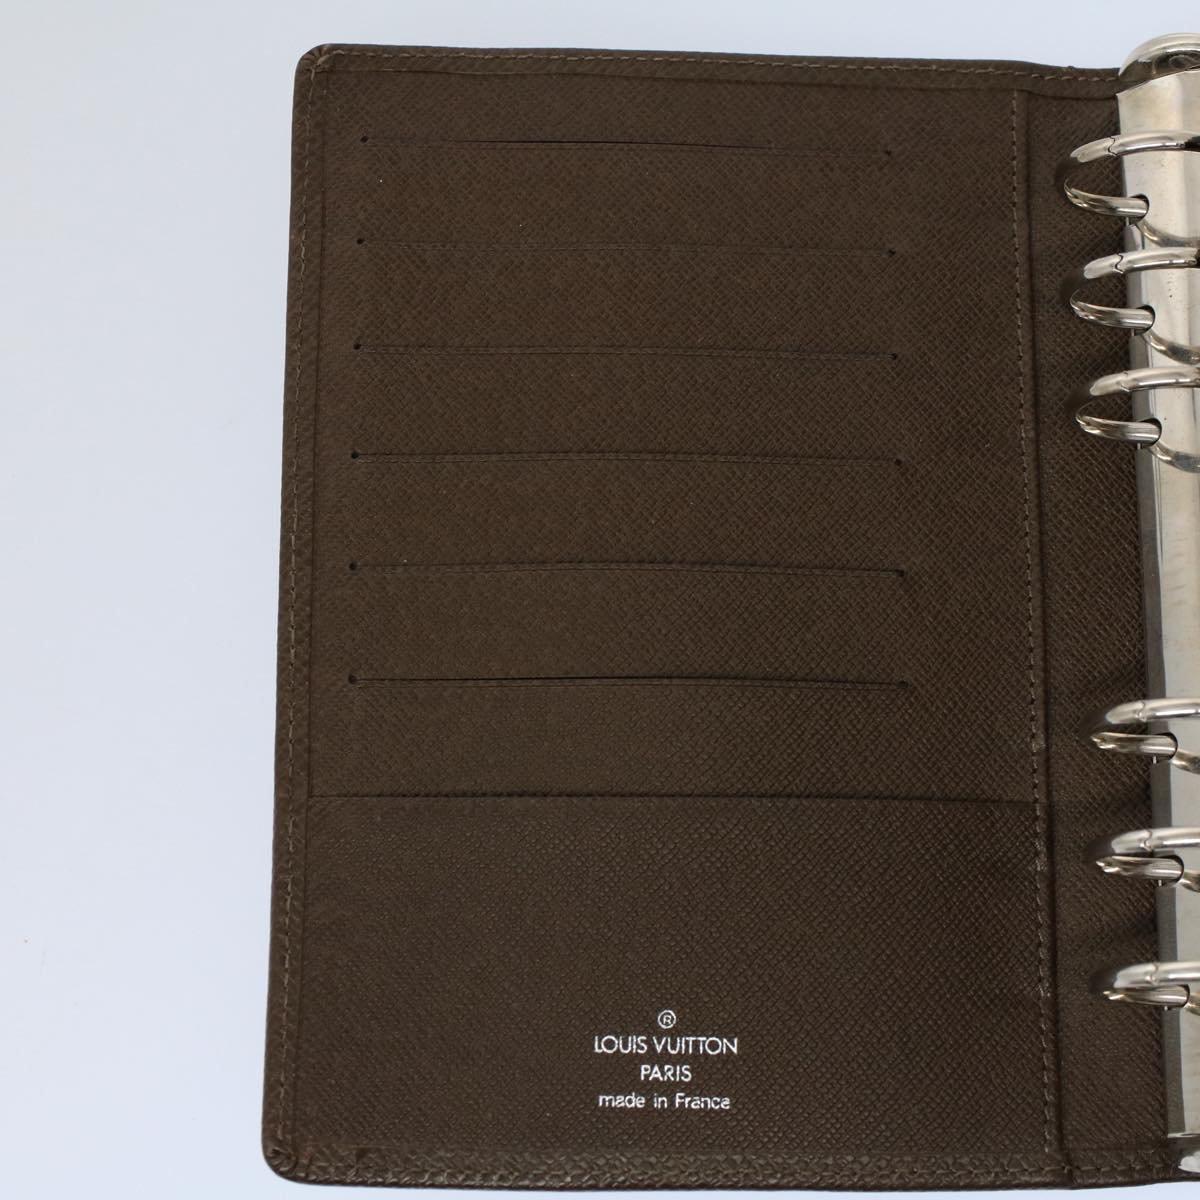 LOUIS VUITTON Taiga Agenda MM Day Planner Cover Grizzly R20426 LV Auth ar10673